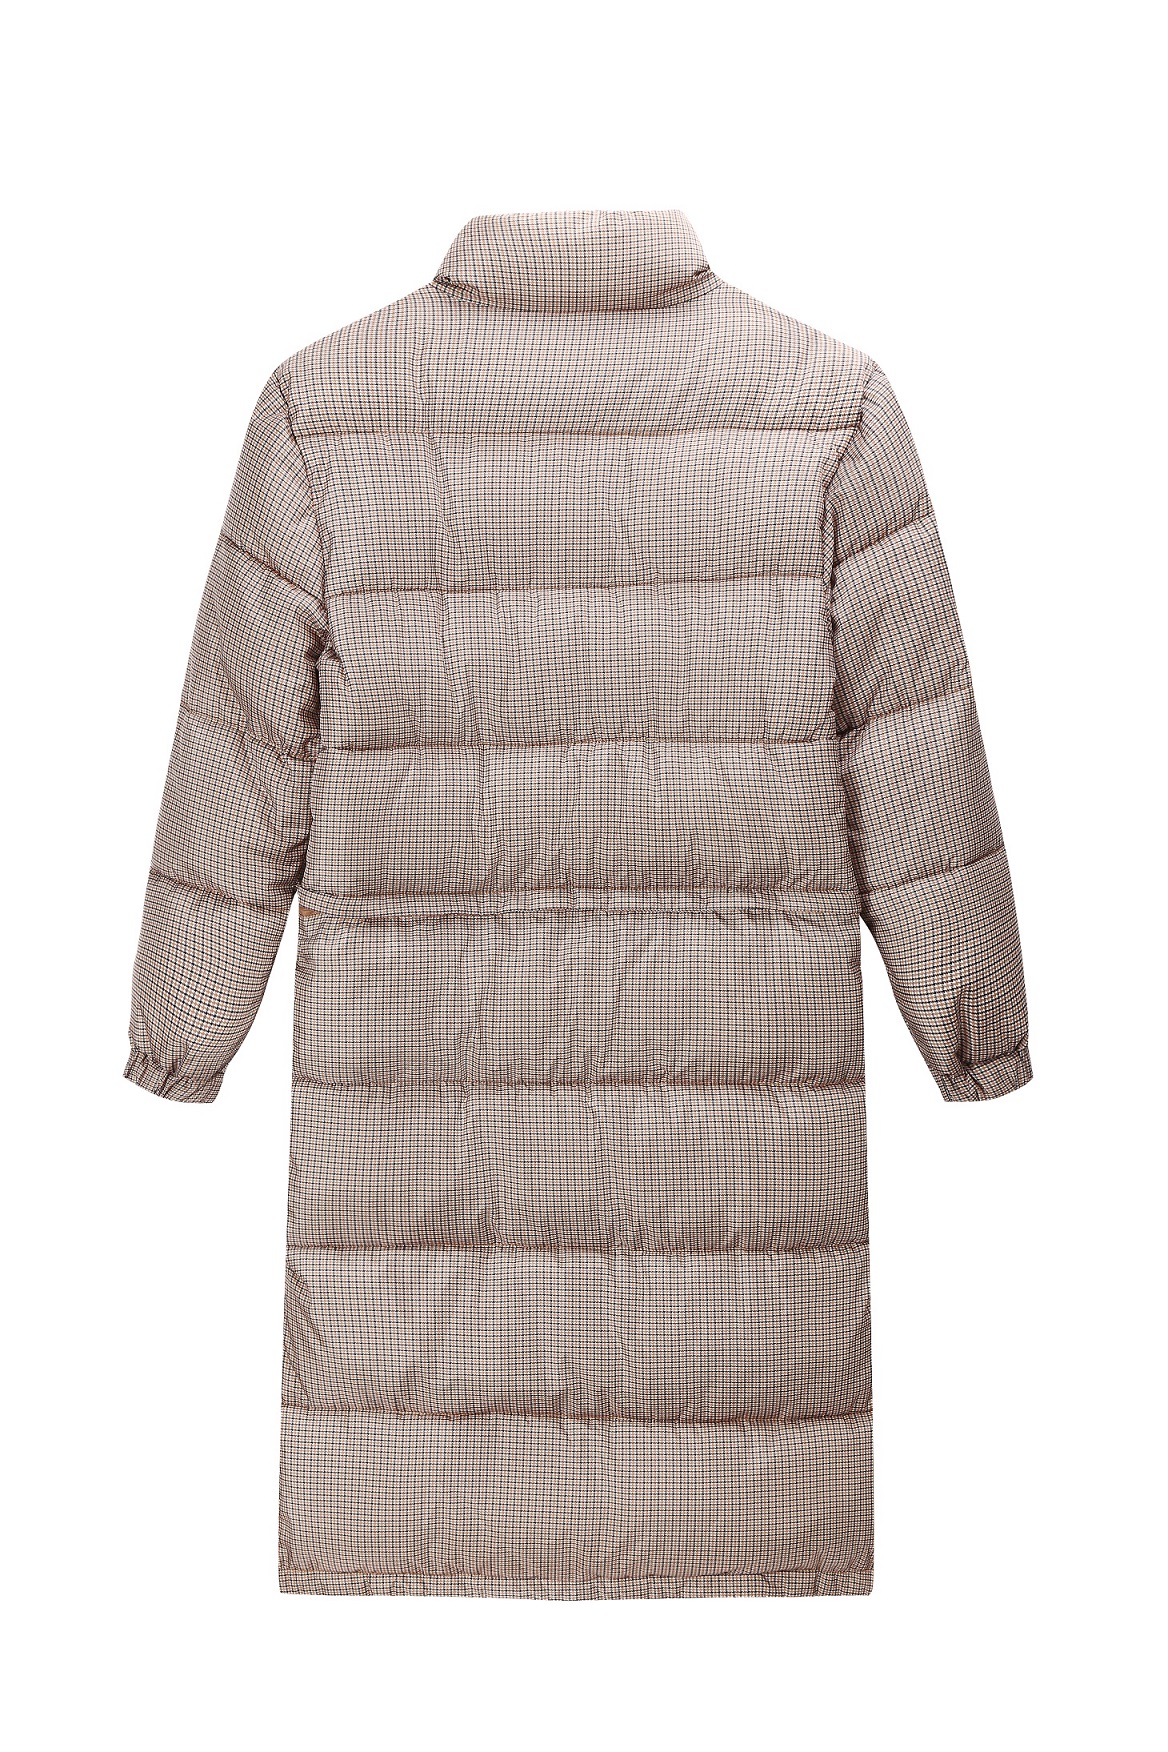 New Detachable Women's Winter Puffer Coats With Long And Short Design 